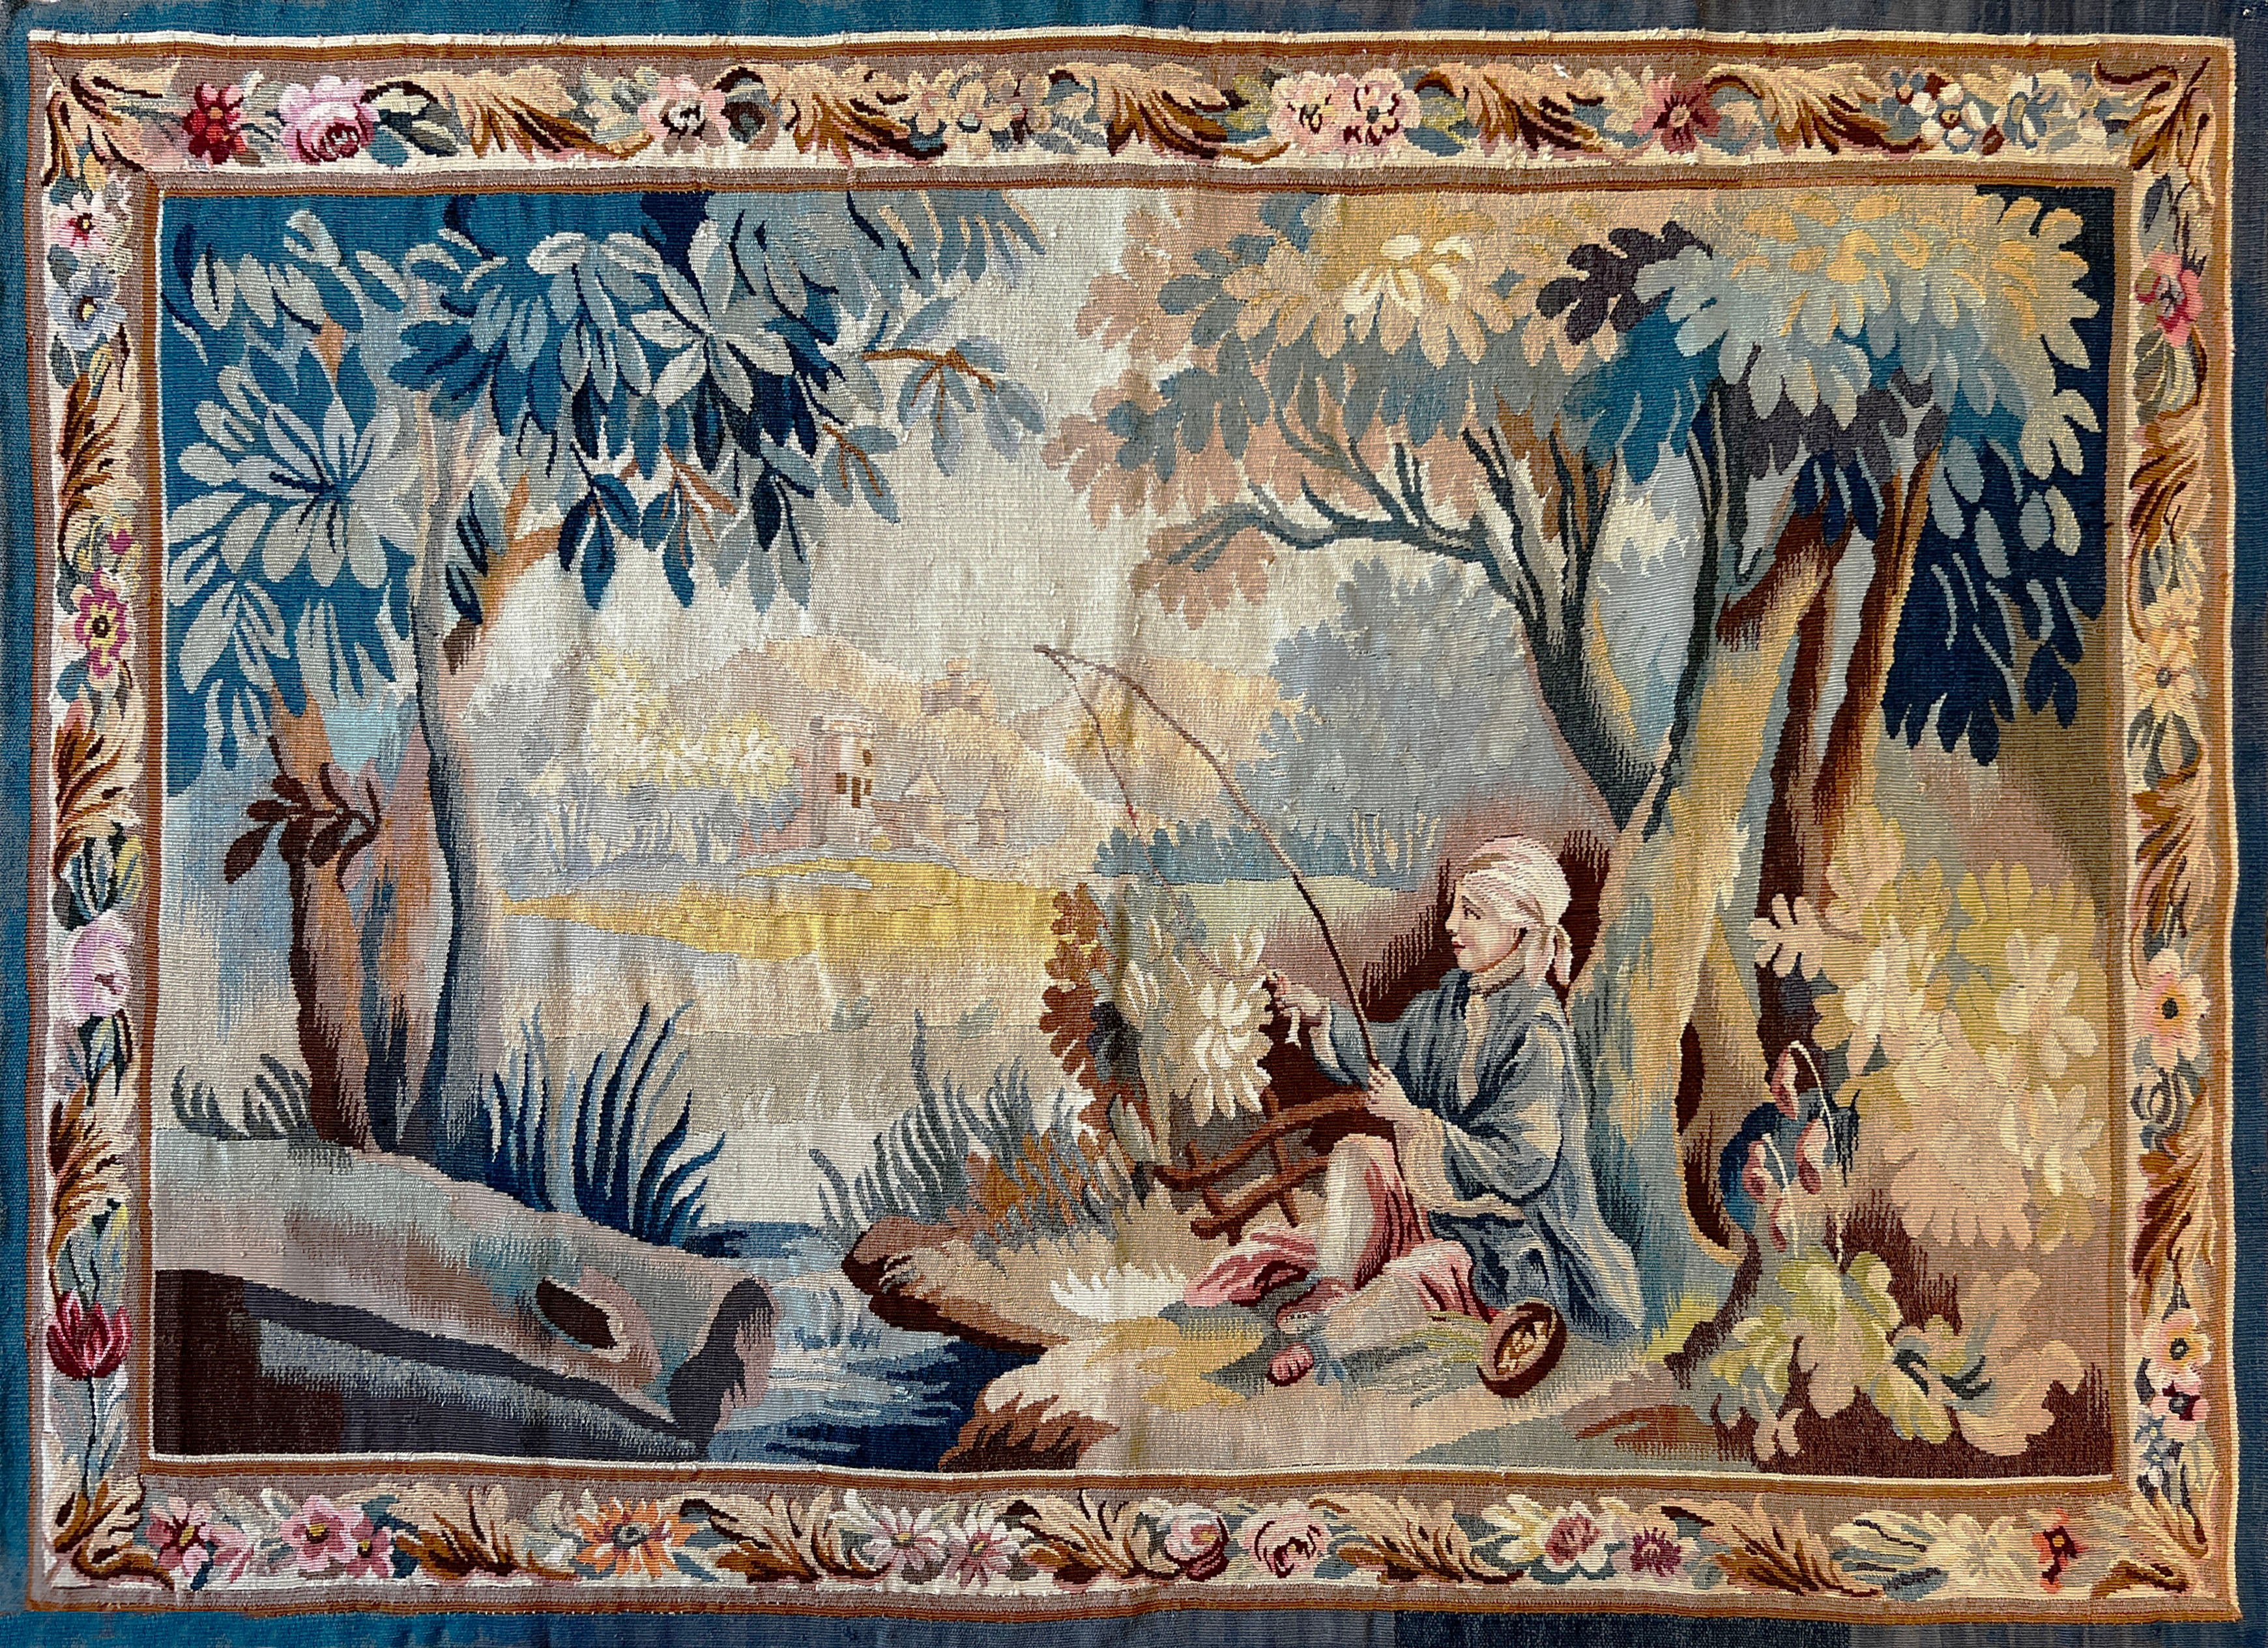 20th Century Aubusson Tapestry "Fisherman" - N° 767 For Sale